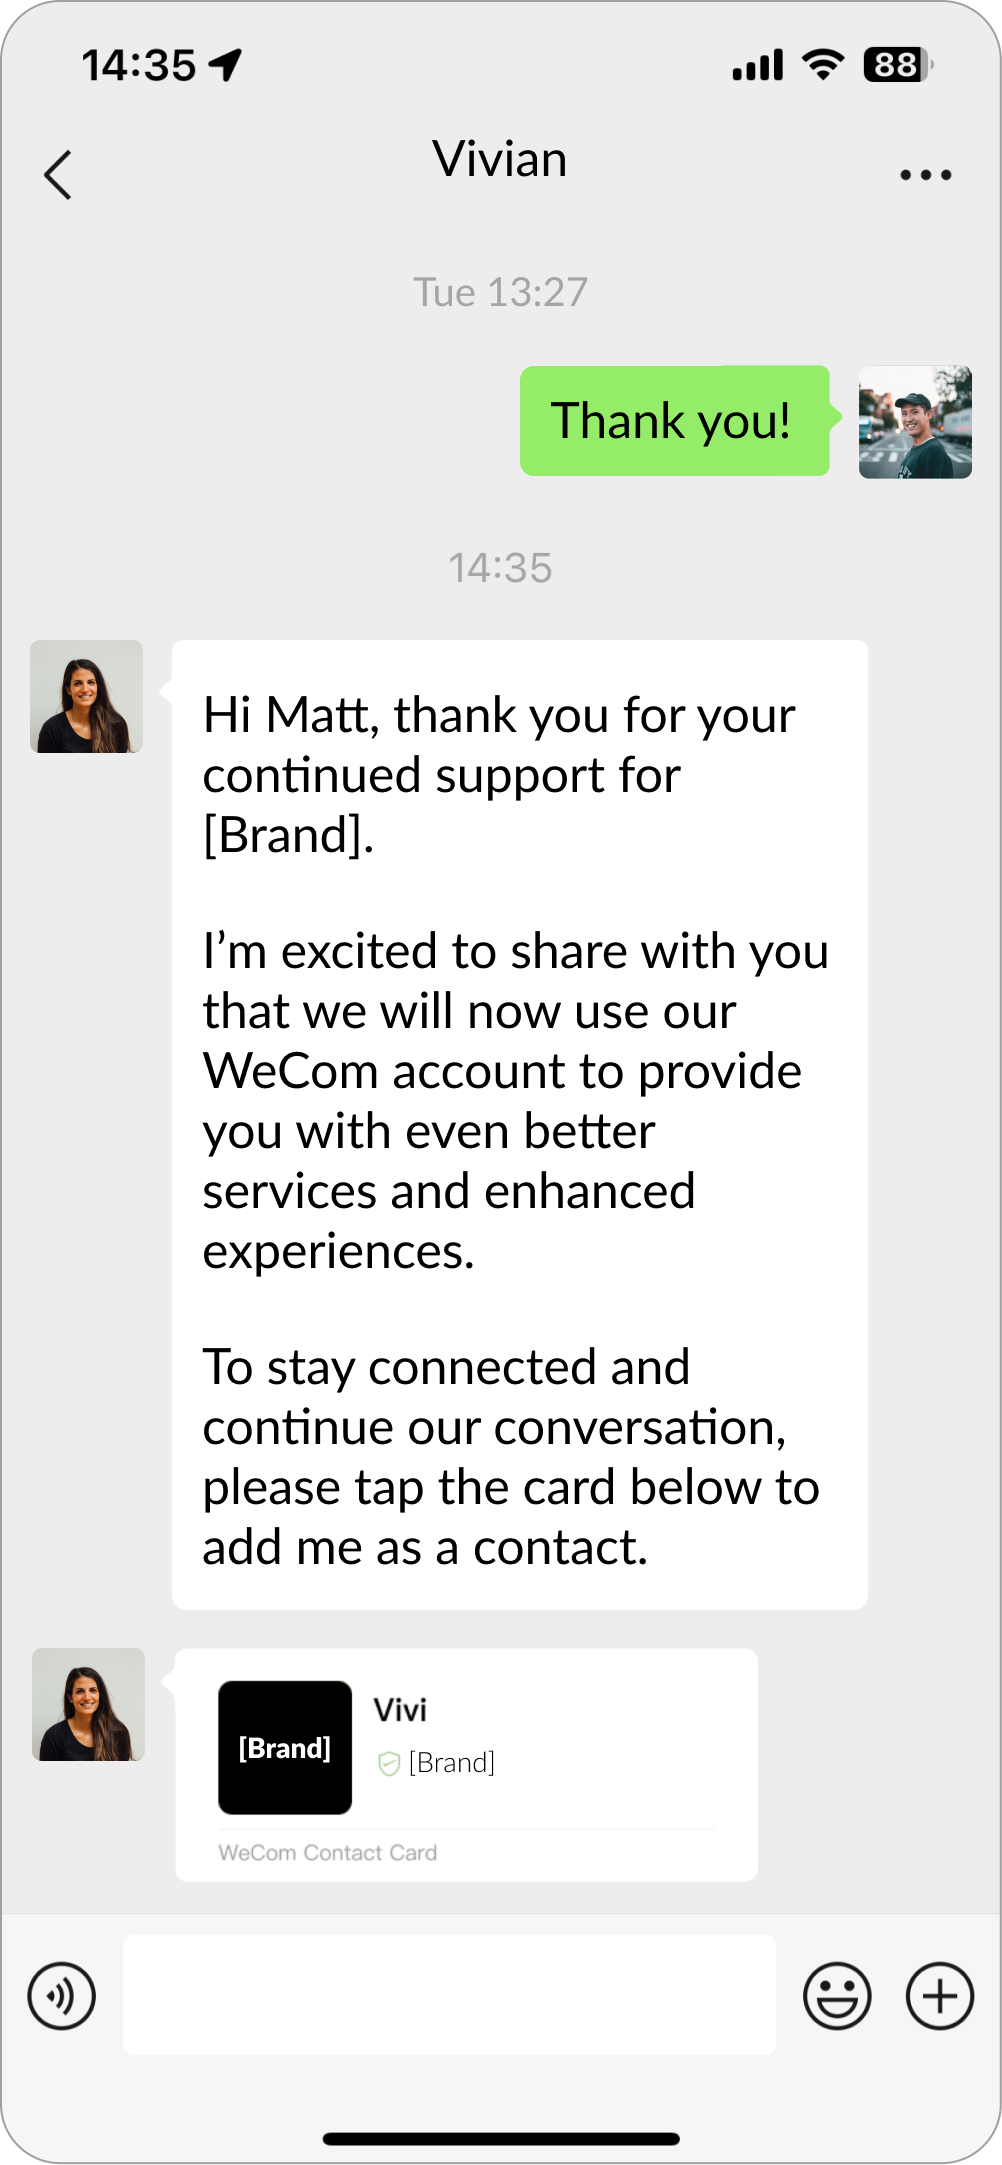 Staff can share WeCom business cards, similar to WeChat business cards, to their WeChat contacts to have them add their WeCom accounts as friends